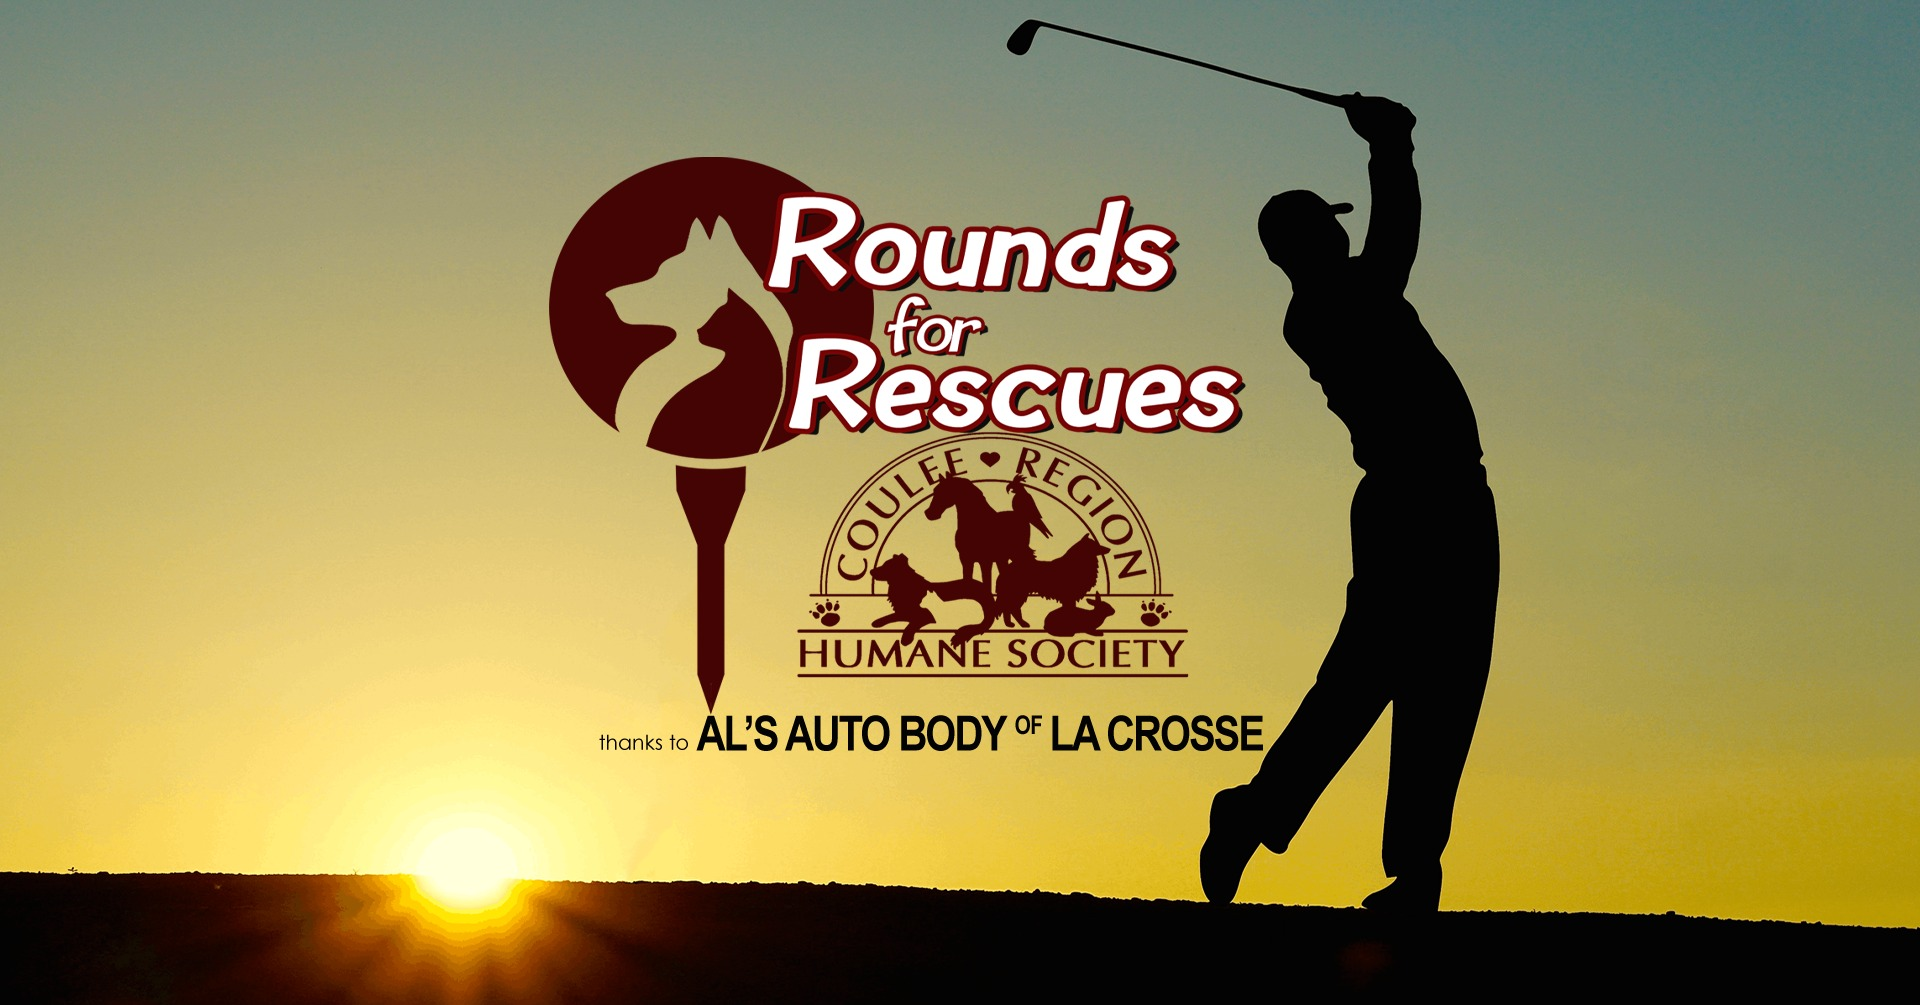 Pet therapy pups, $25k, $10k hole-in-one contests — a few spots remain for Friday’s Rounds for Rescues to help Coulee Region Humane Society